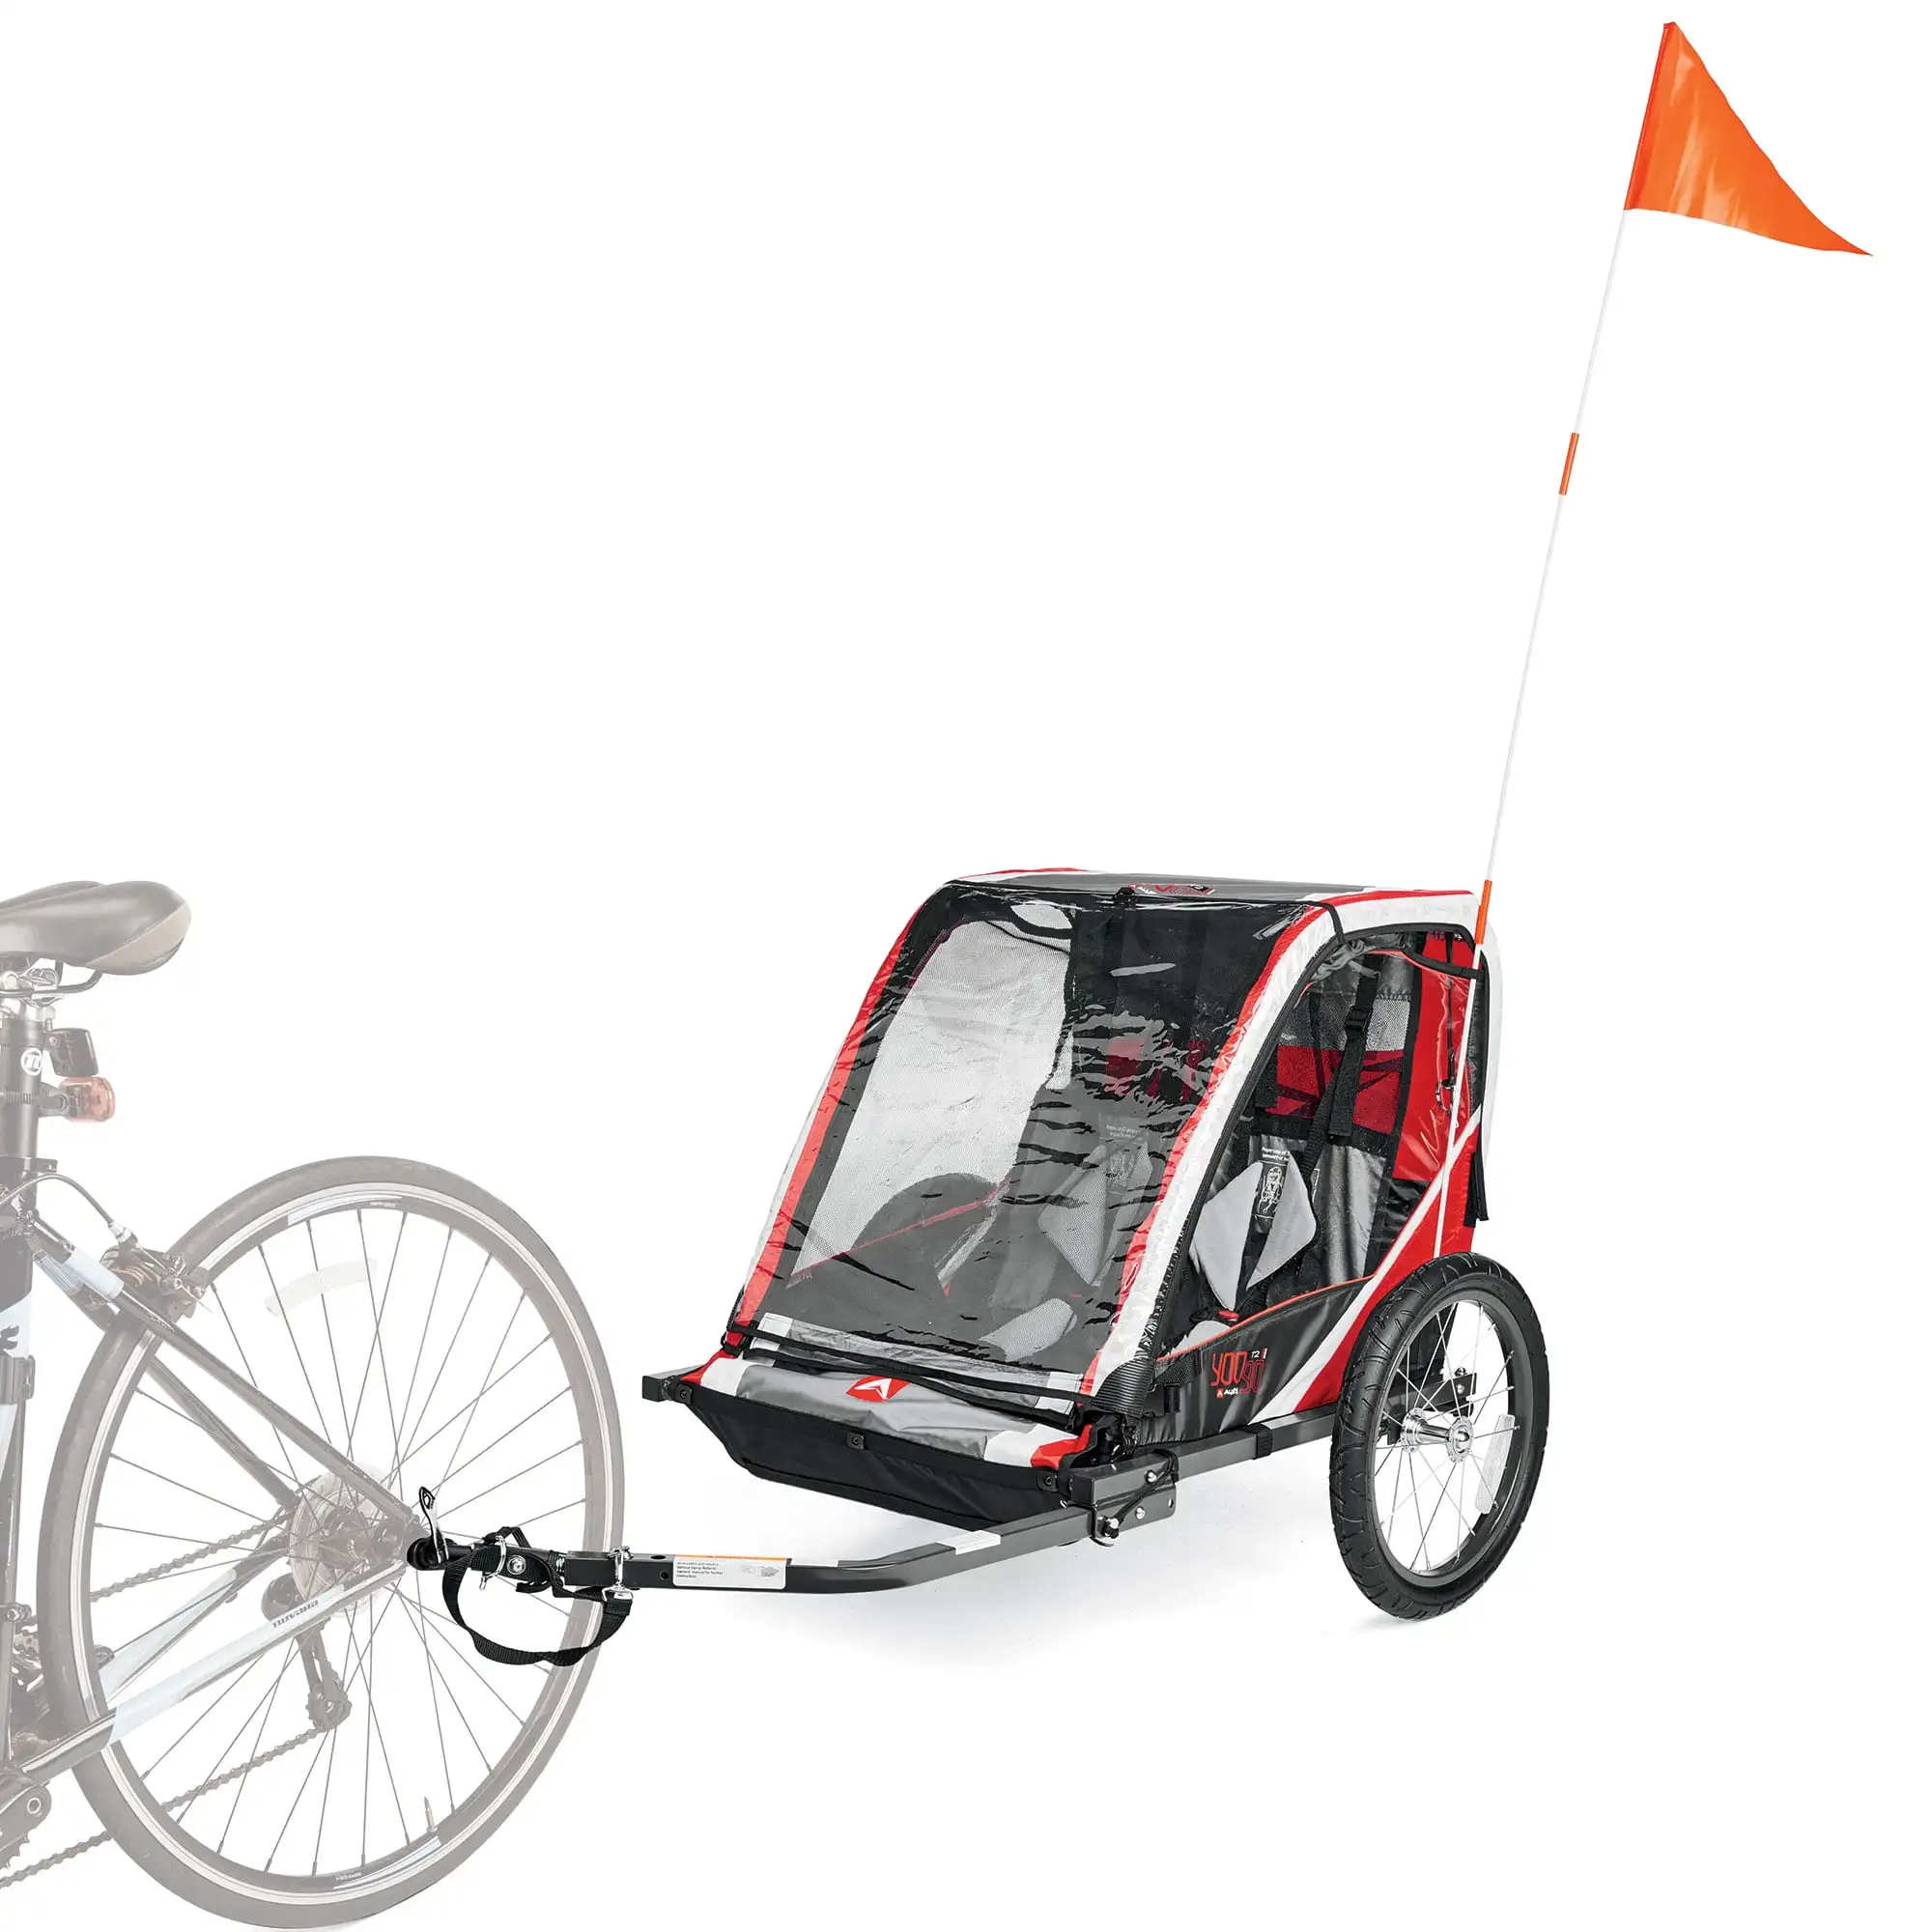 

Deluxe Bicycle Trailer for 2-Children up to 50 lbs each, model T2 color Red, max capacity 100 lbs